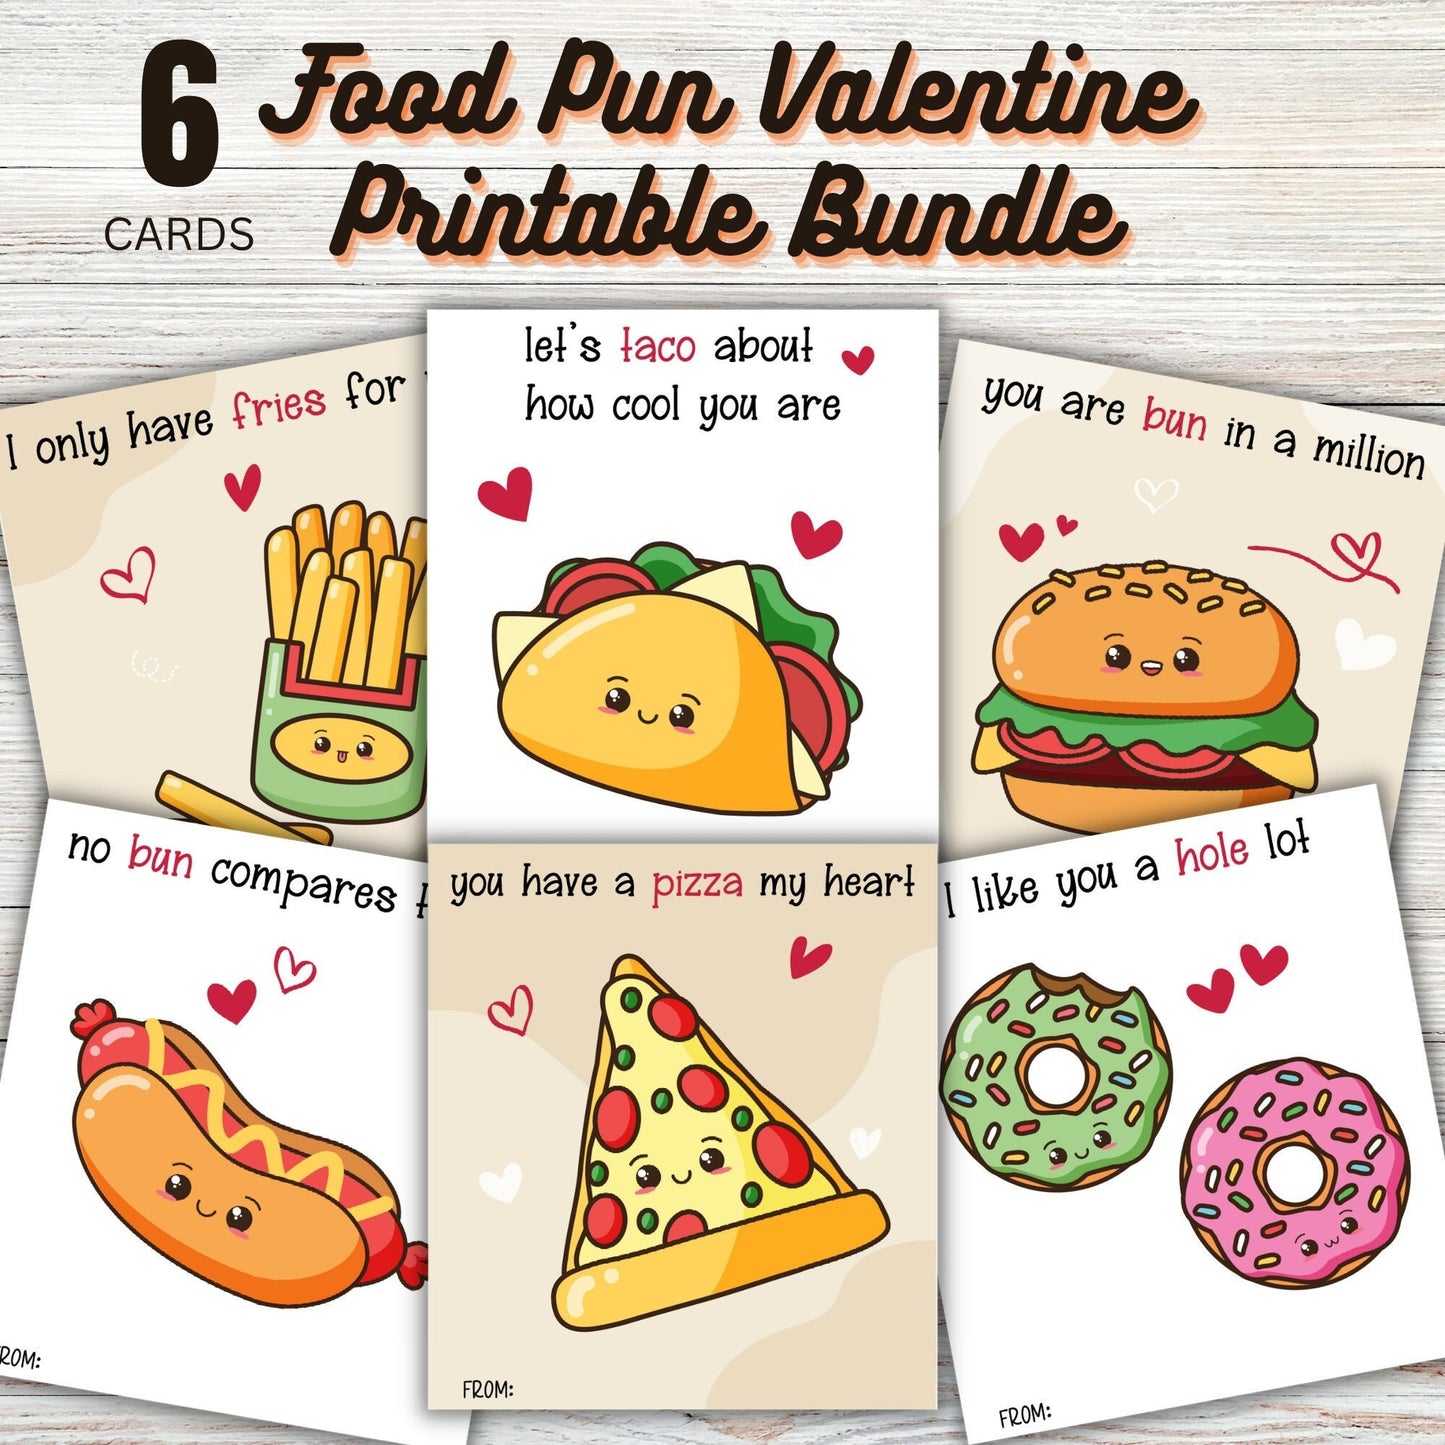 Fast Food Printable Valentine's Day Cards for Students